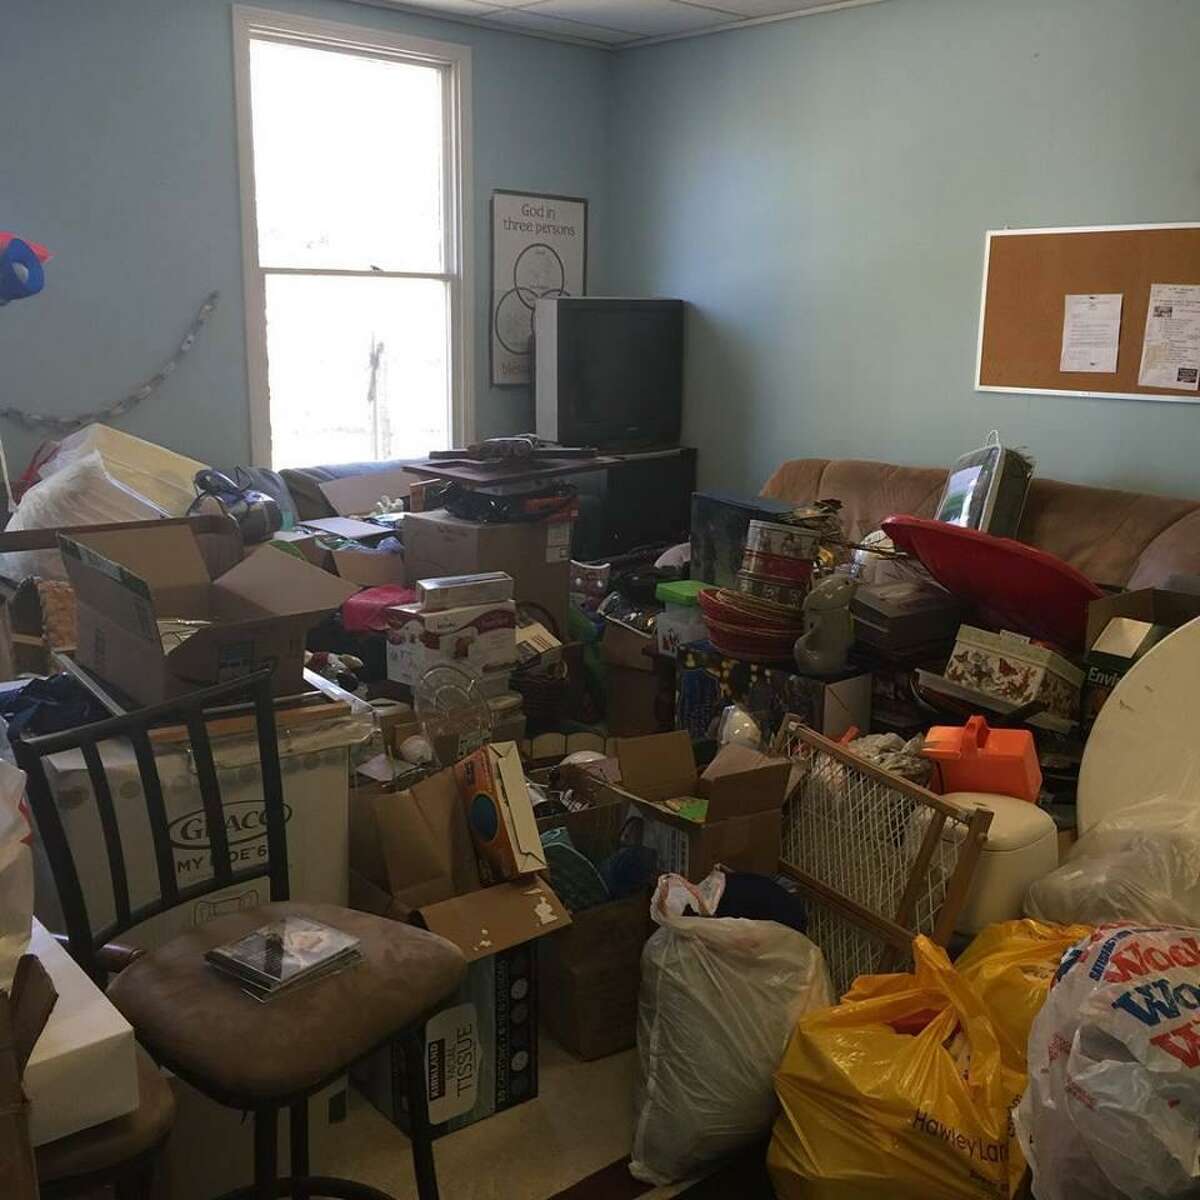 Bags of items have been collected for a charity tag sale that will take place March 24, 2019 at Monroe Congregational Church, 34 Church St., Monroe.